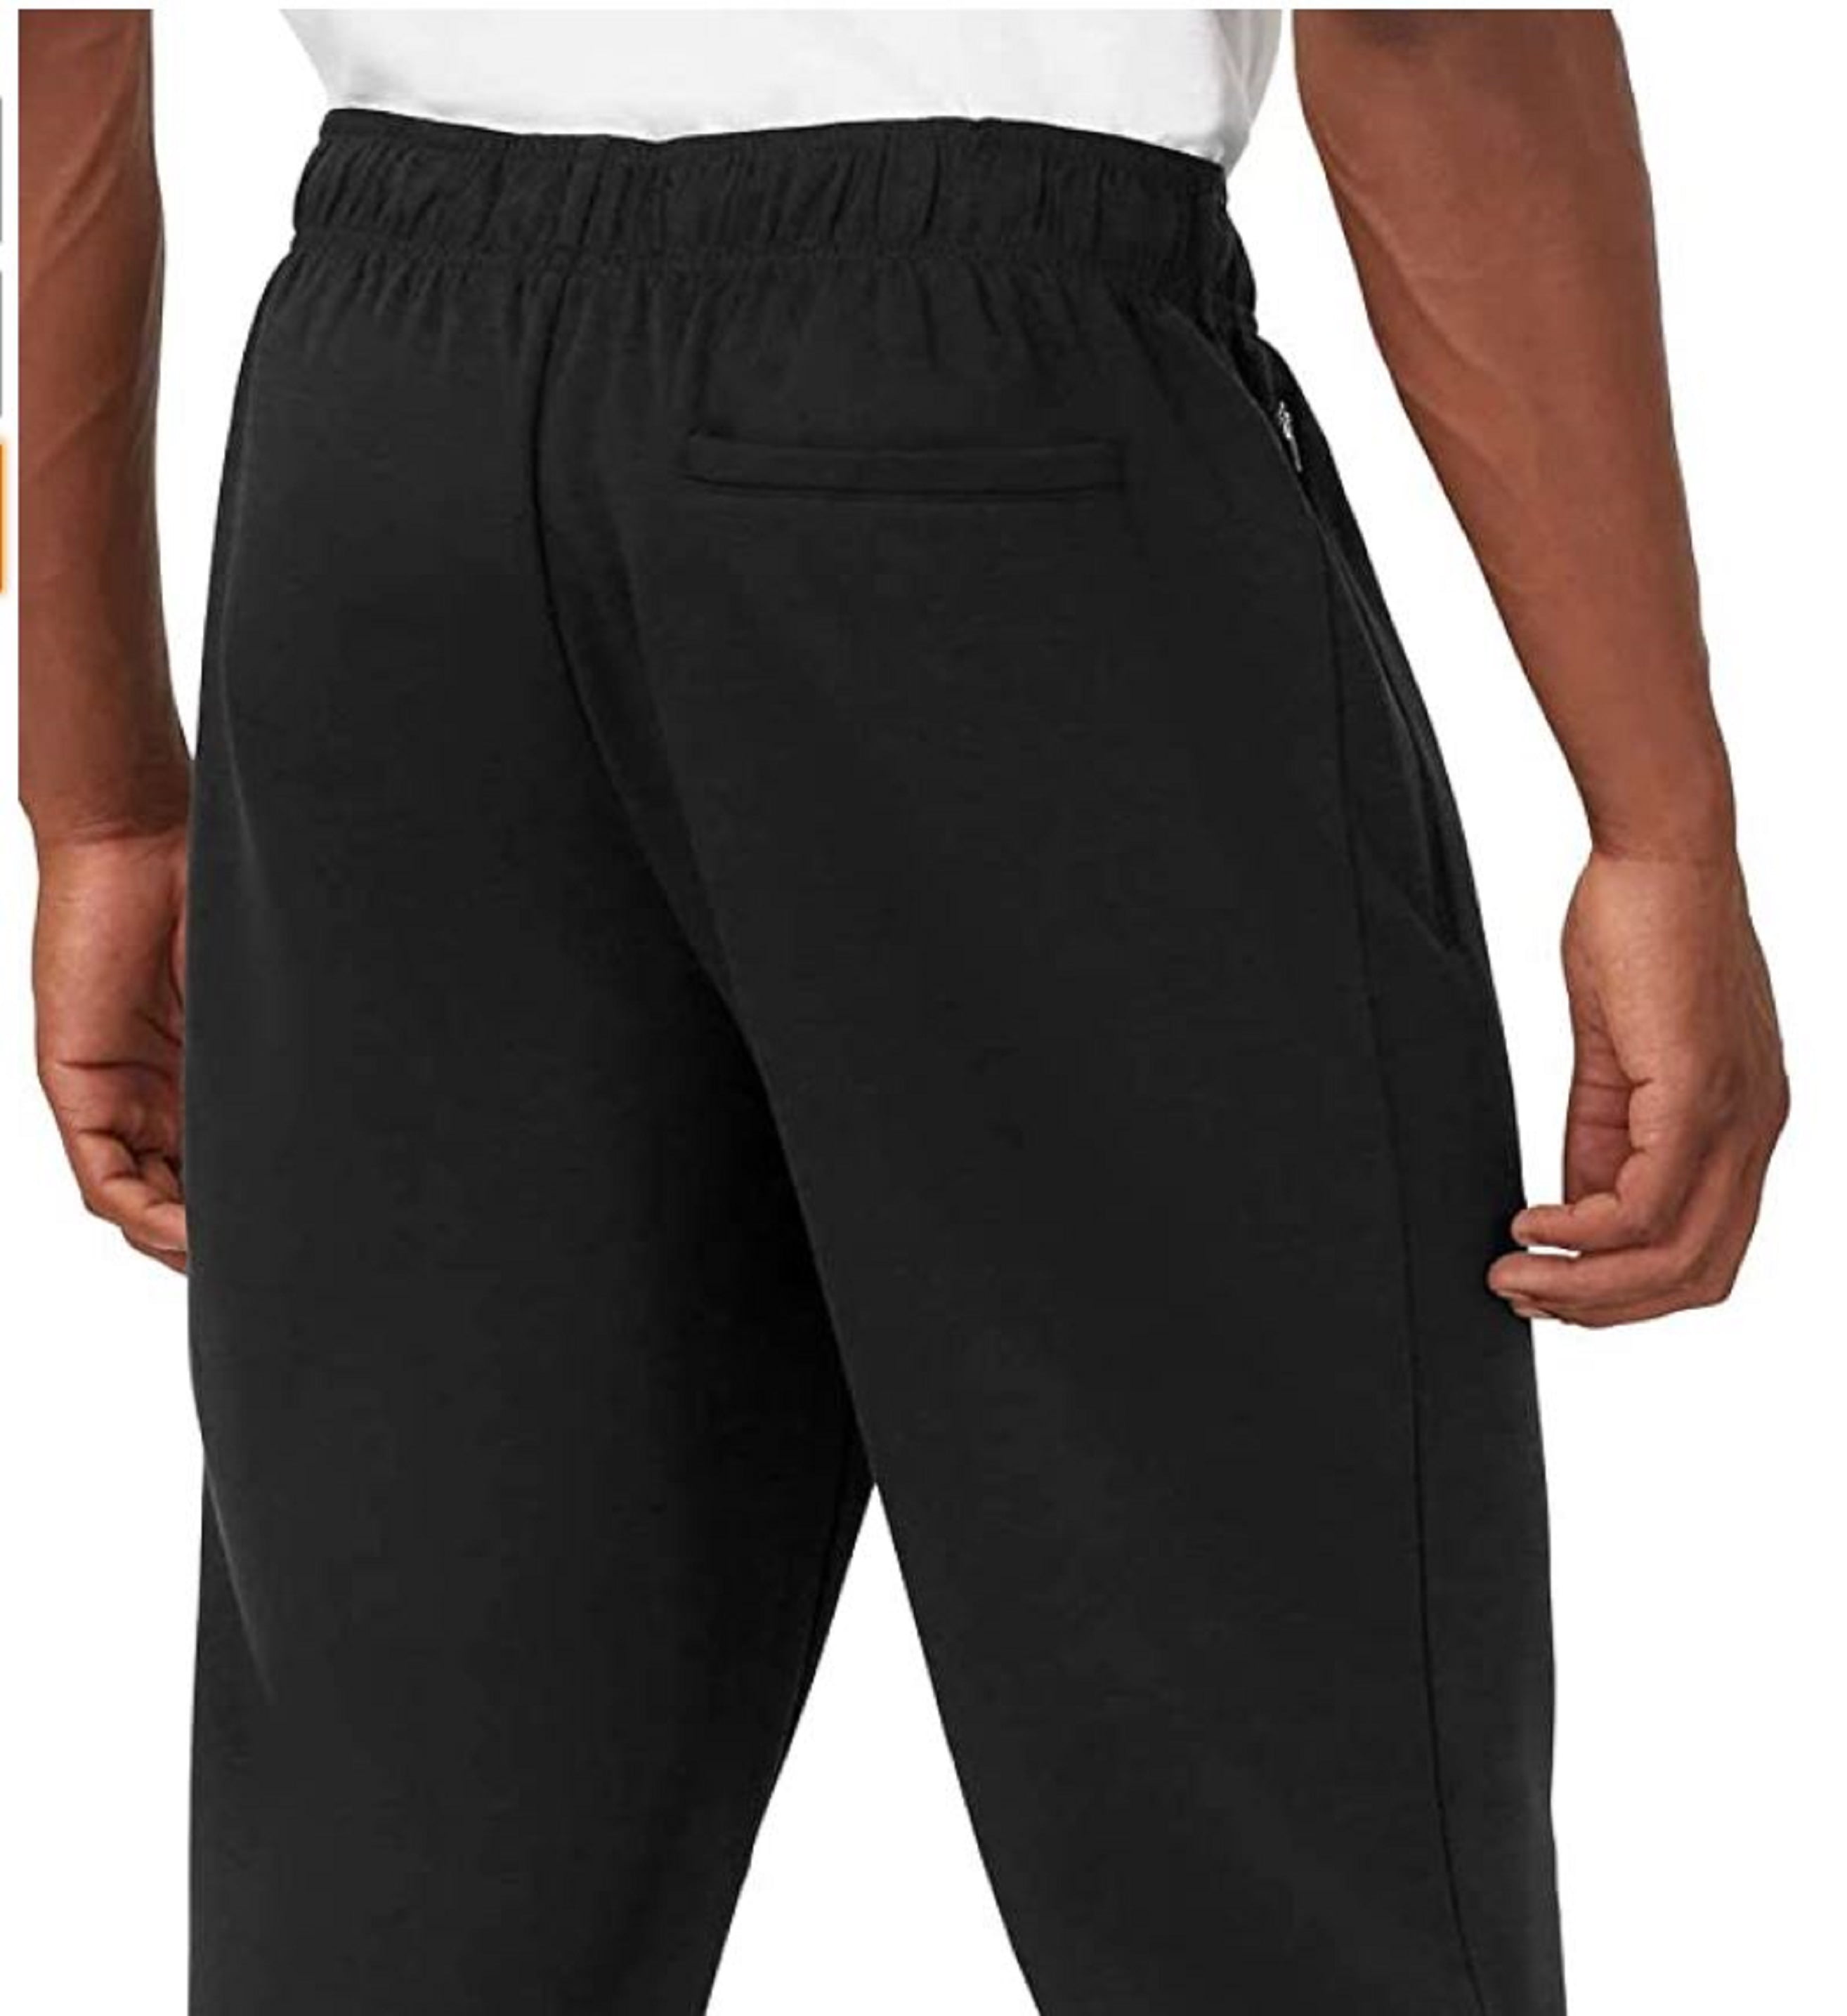 Fila Thora Track Pants from Fila on 21 Buttons